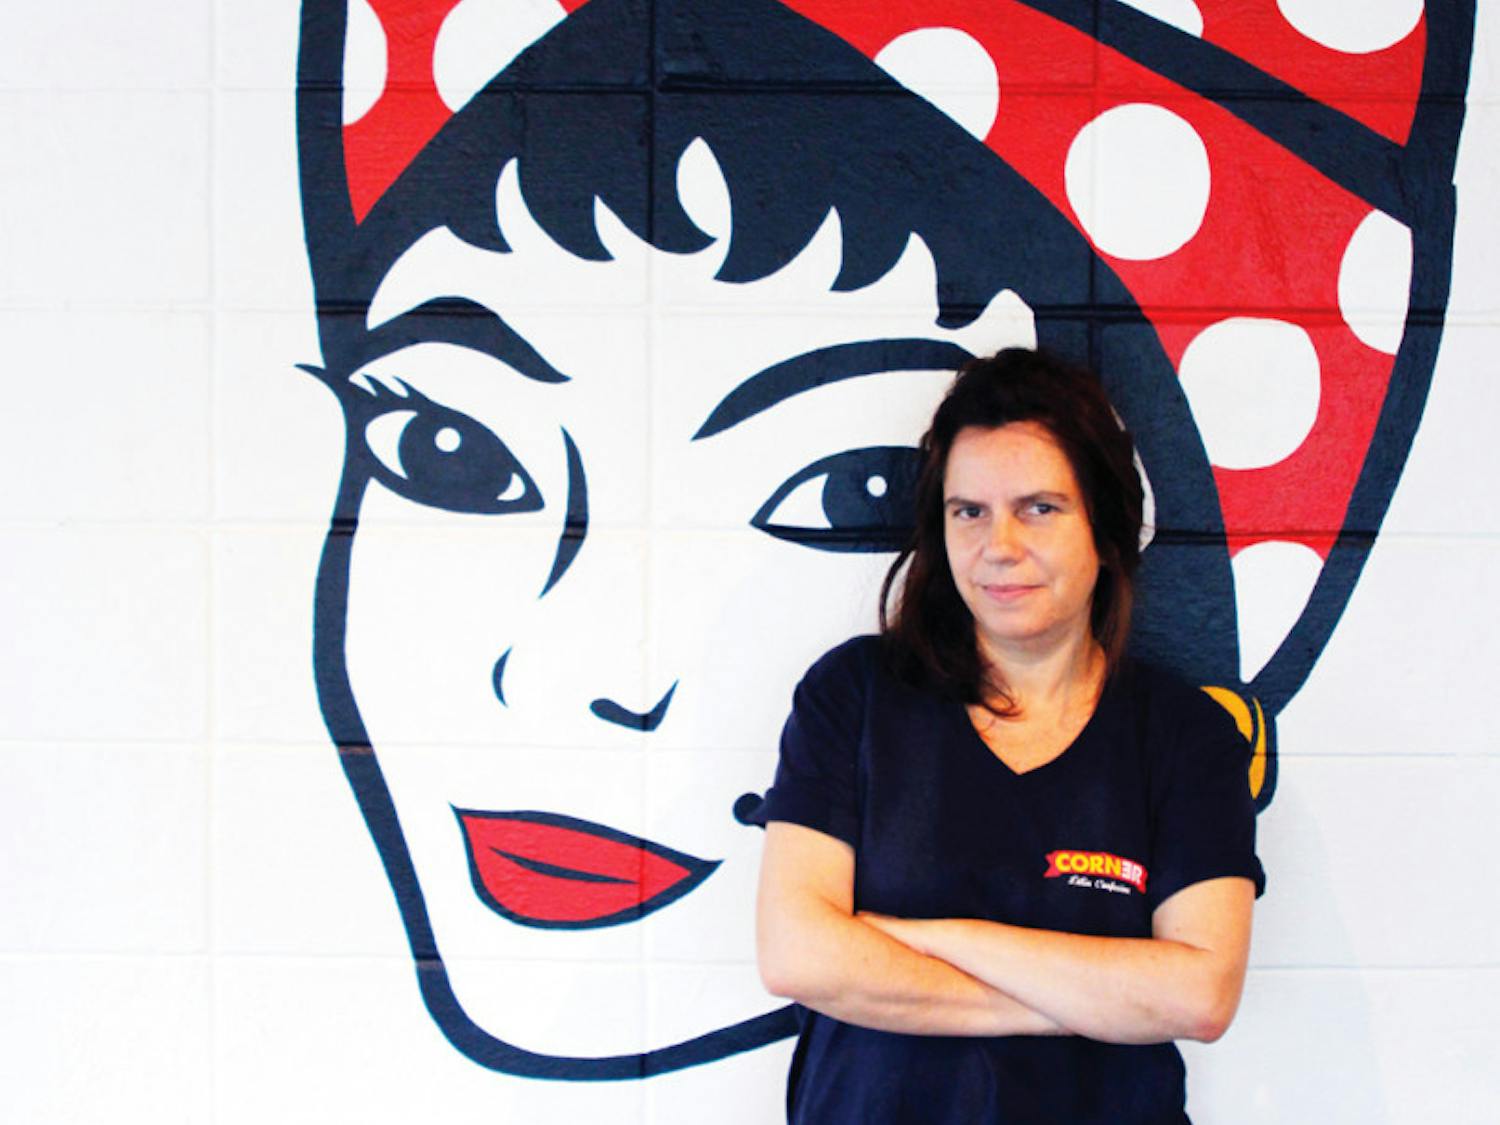 Venezuelan native Leonor Antoni, 47, is the owner and chef at Corner, a Latin fusion restaurant at 1220 W. University Ave.